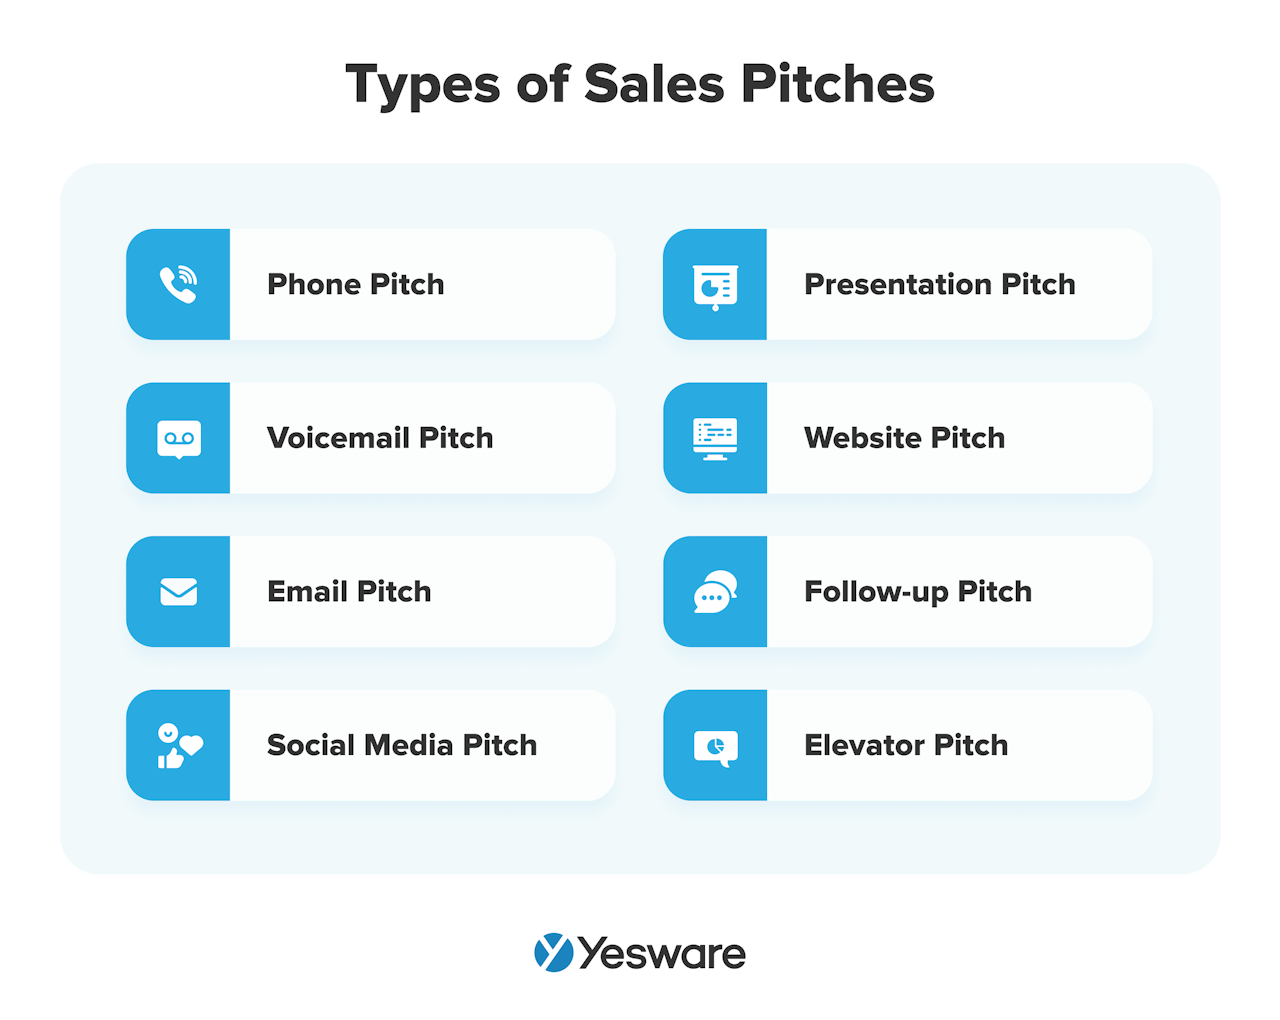 Types of sales pitches